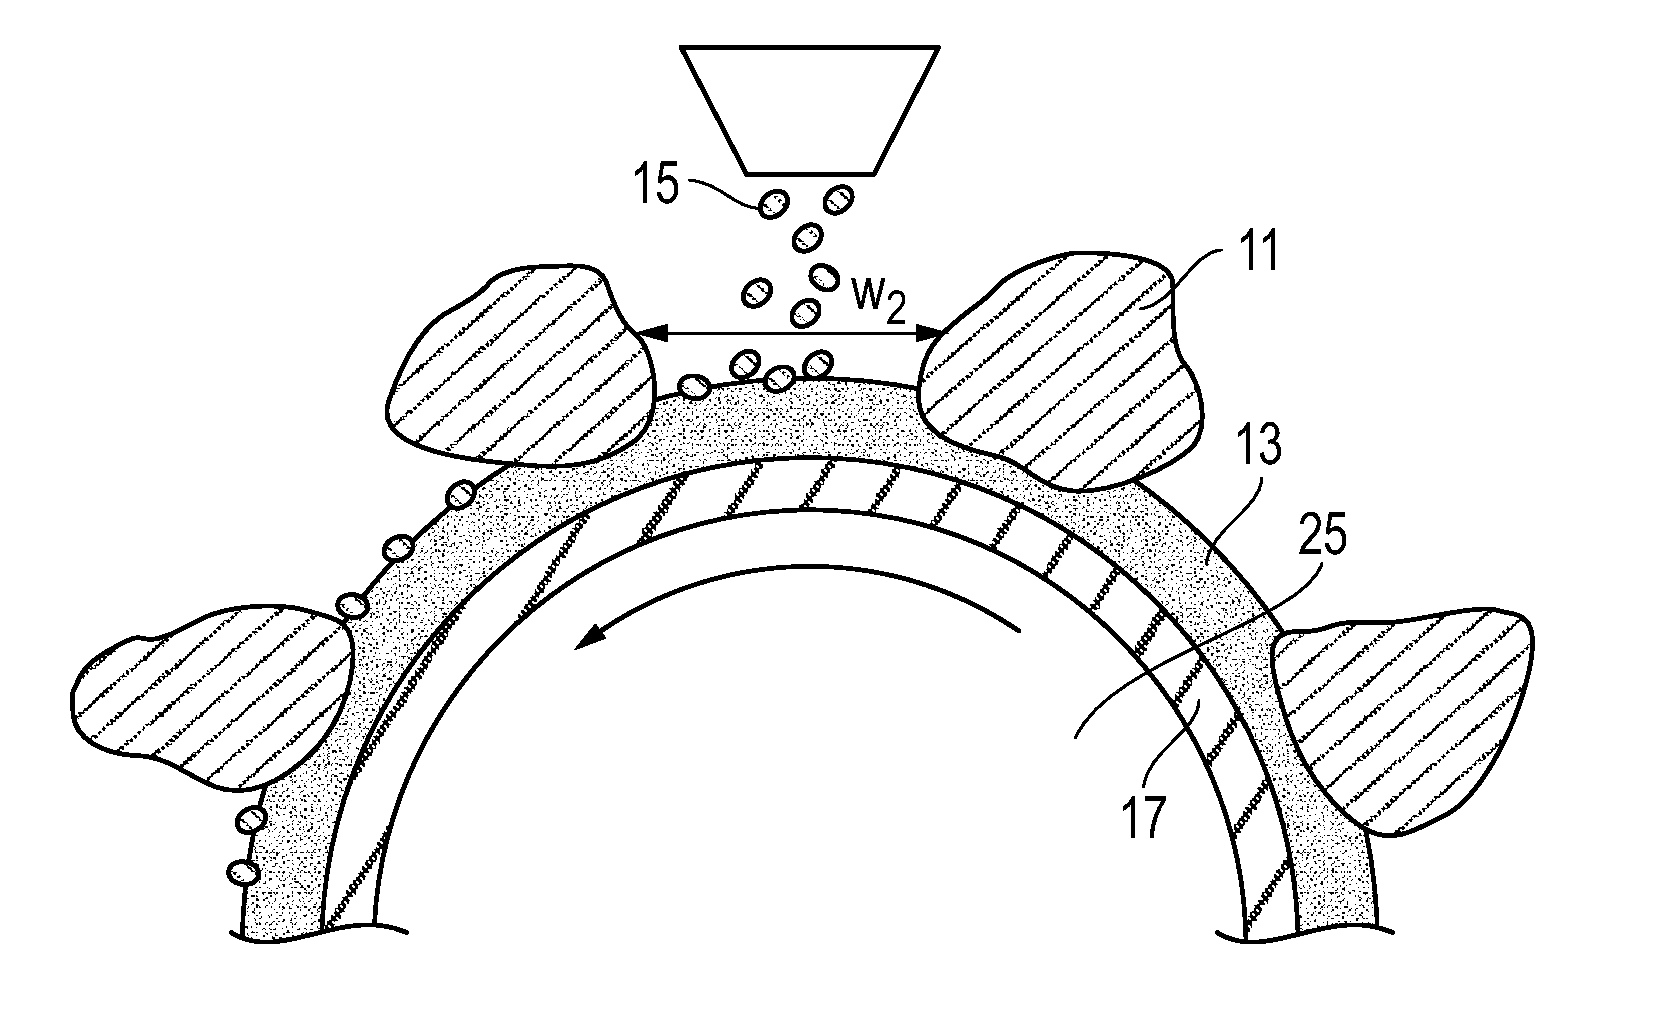 System, method and apparatus for increasing surface solar reflectance of roofing